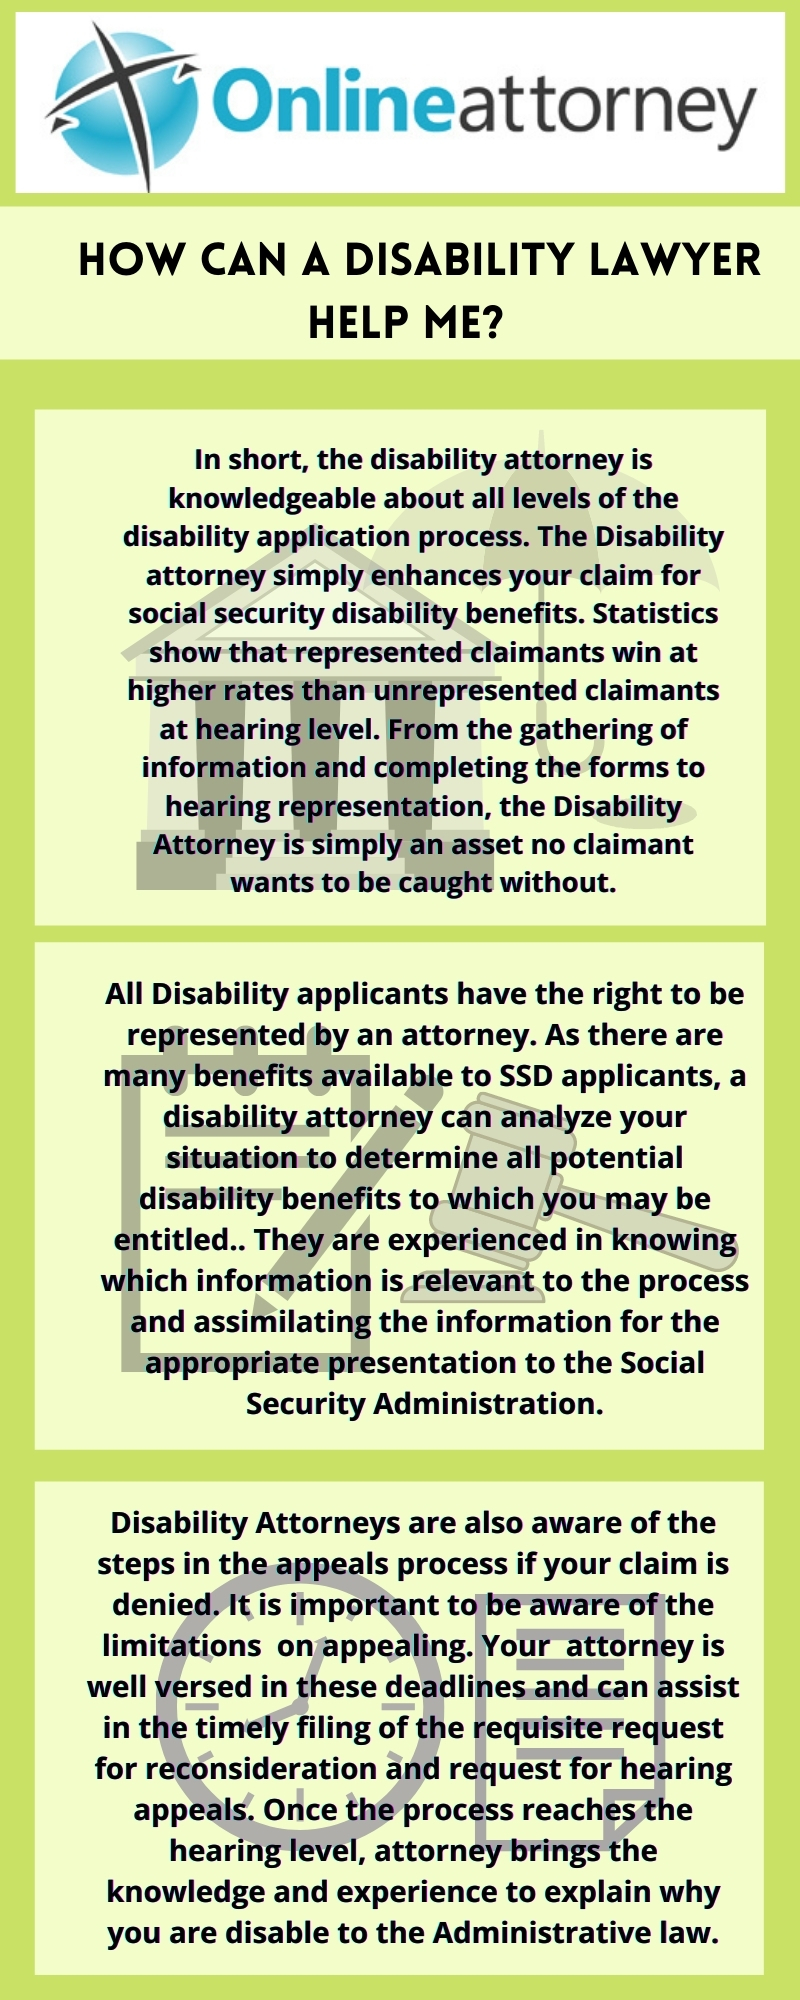 How a disability lawyer help me